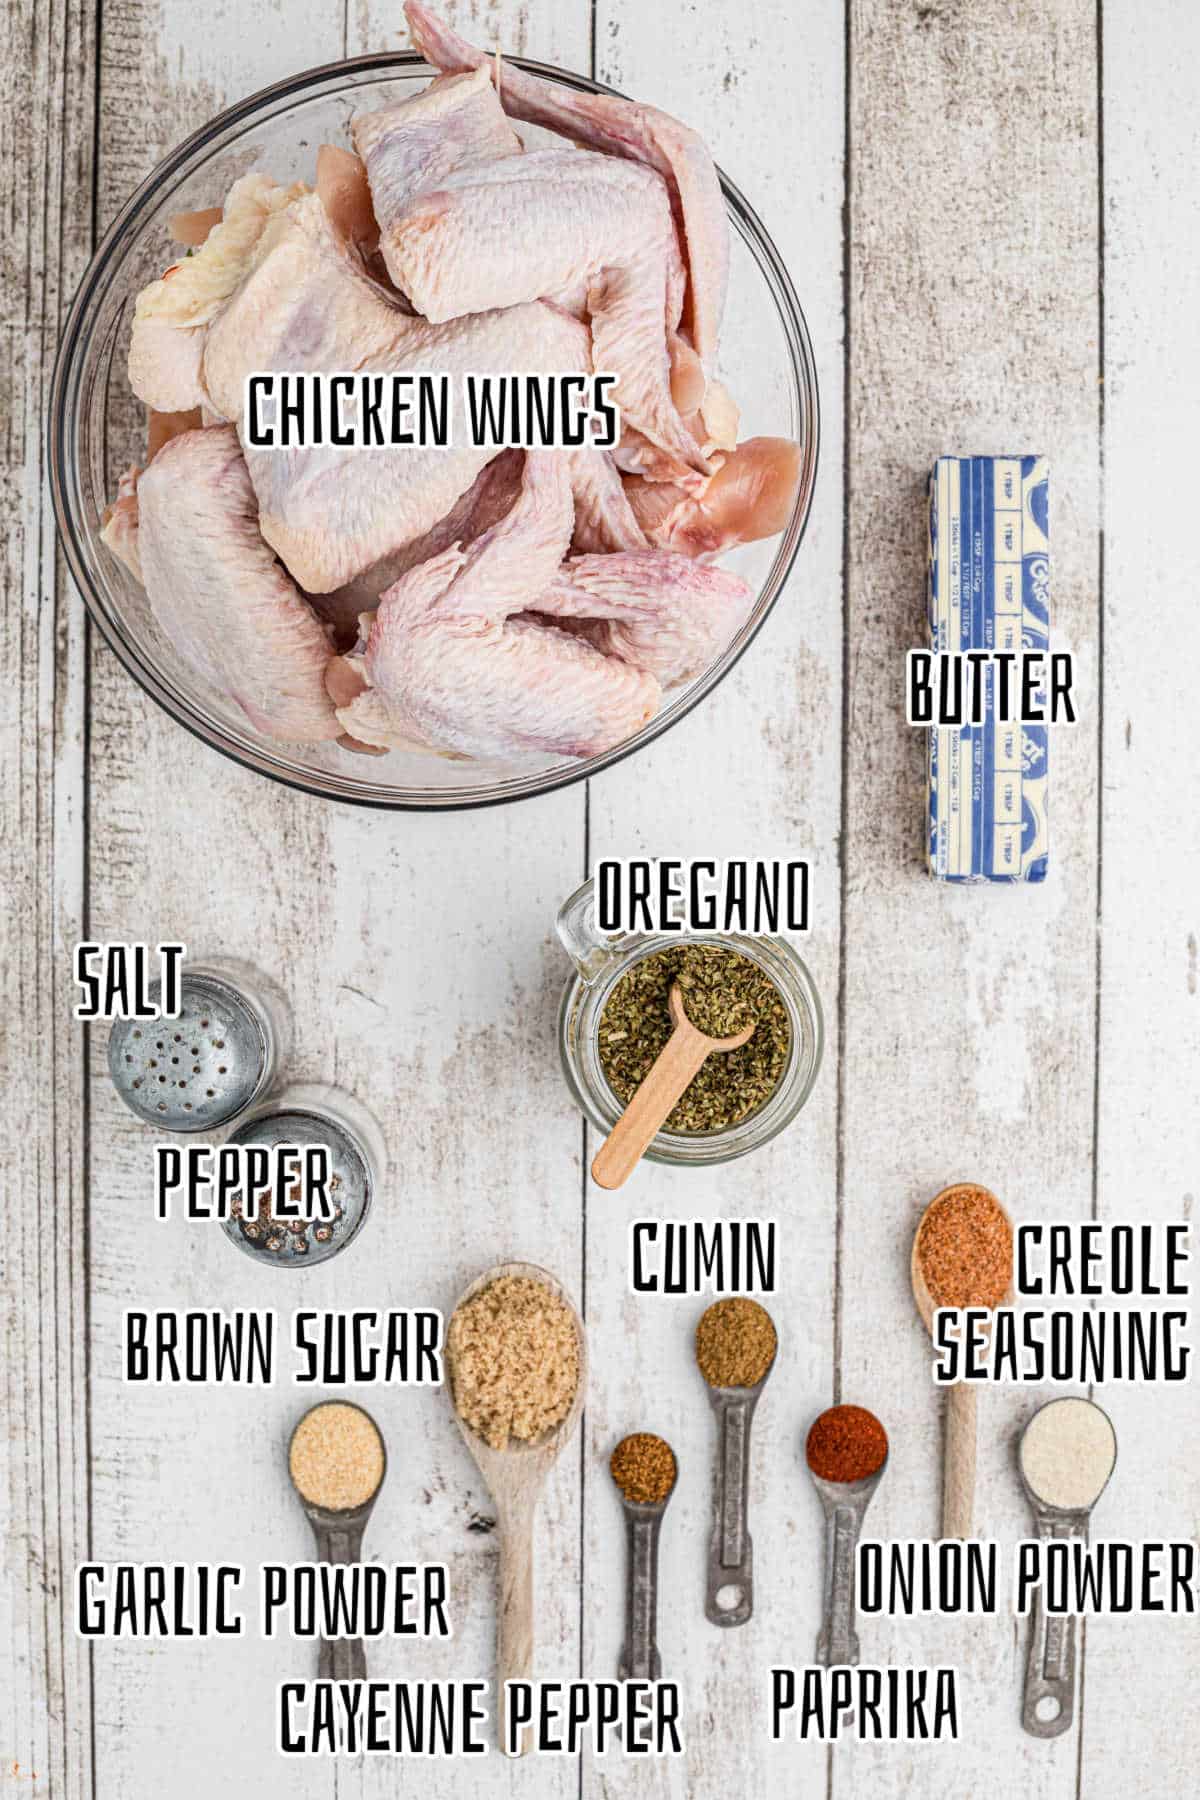 Ingredients needed to make Wingstop Louisiana Rub for Chicken Wings.